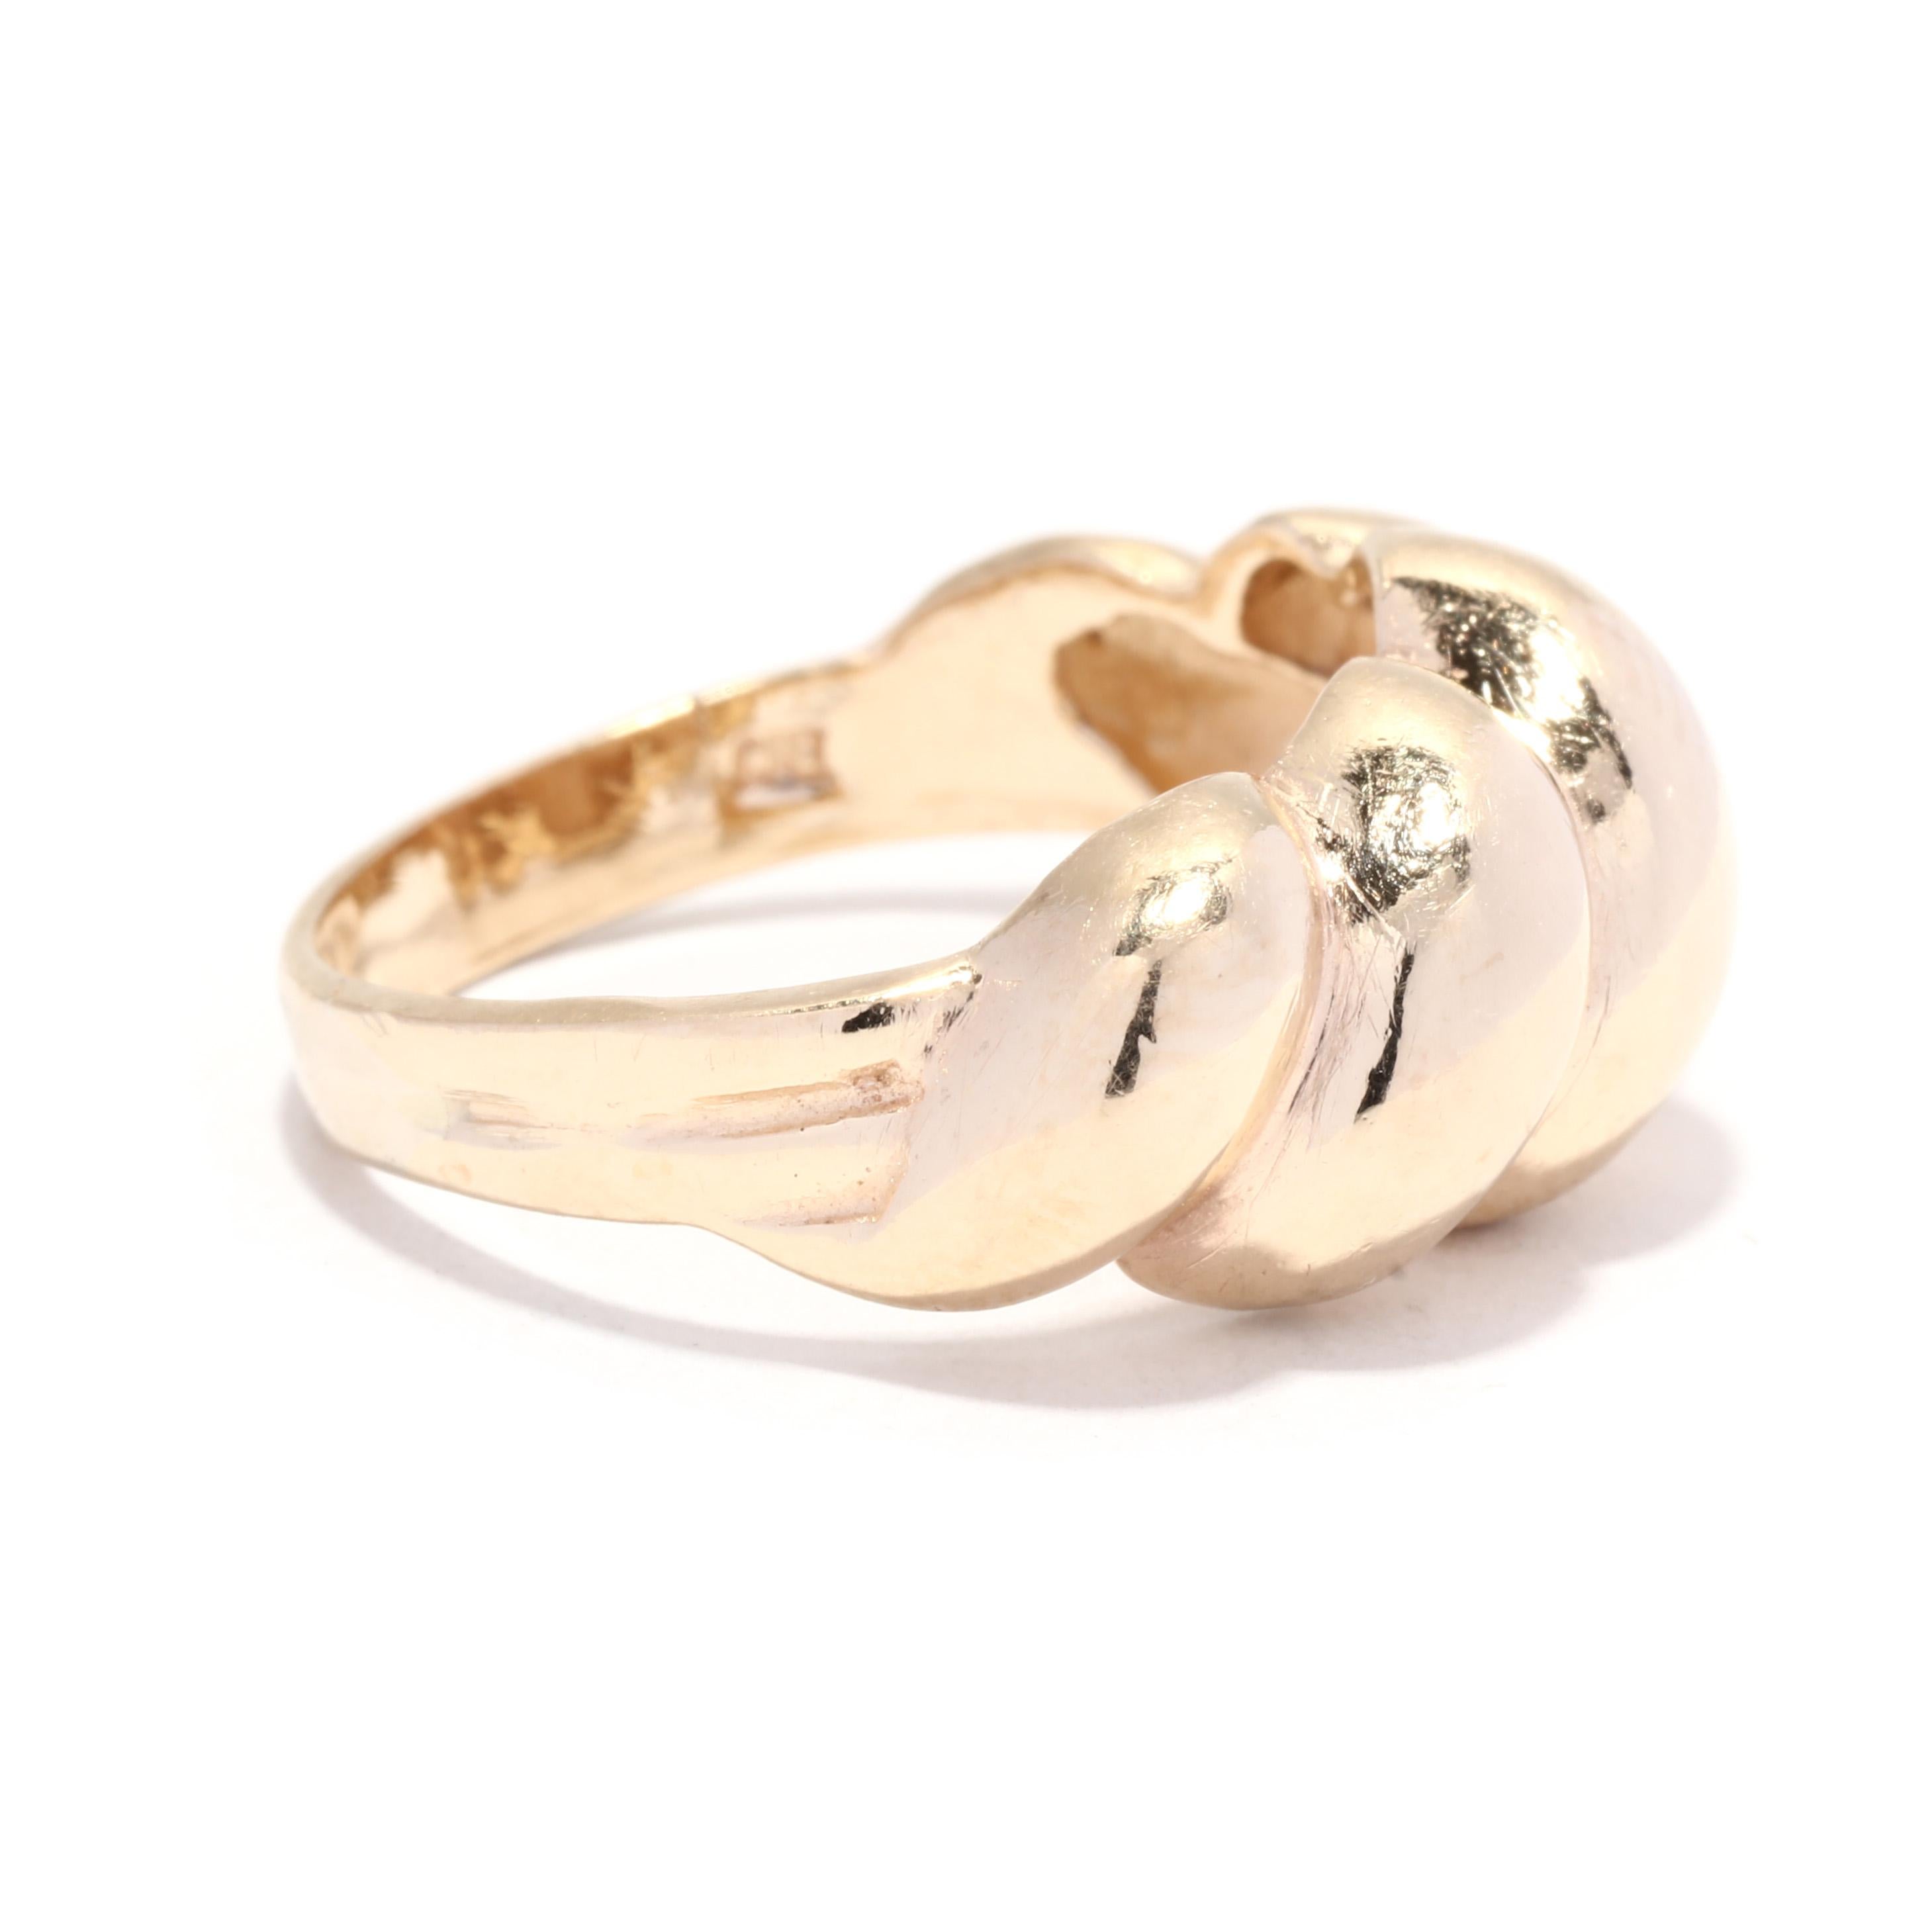 A vintage 10 karat yellow gold domed croissant ring. This stackable ring features a domed ridged design and with a tapered band.

Ring Size 6.5

Rise Off Of Finger: 5 mm

Length: 3/8 in.

Weight: 2.9 dwts. / 4.5 grams

Stamps: 10K CMJ

Ring Sizings